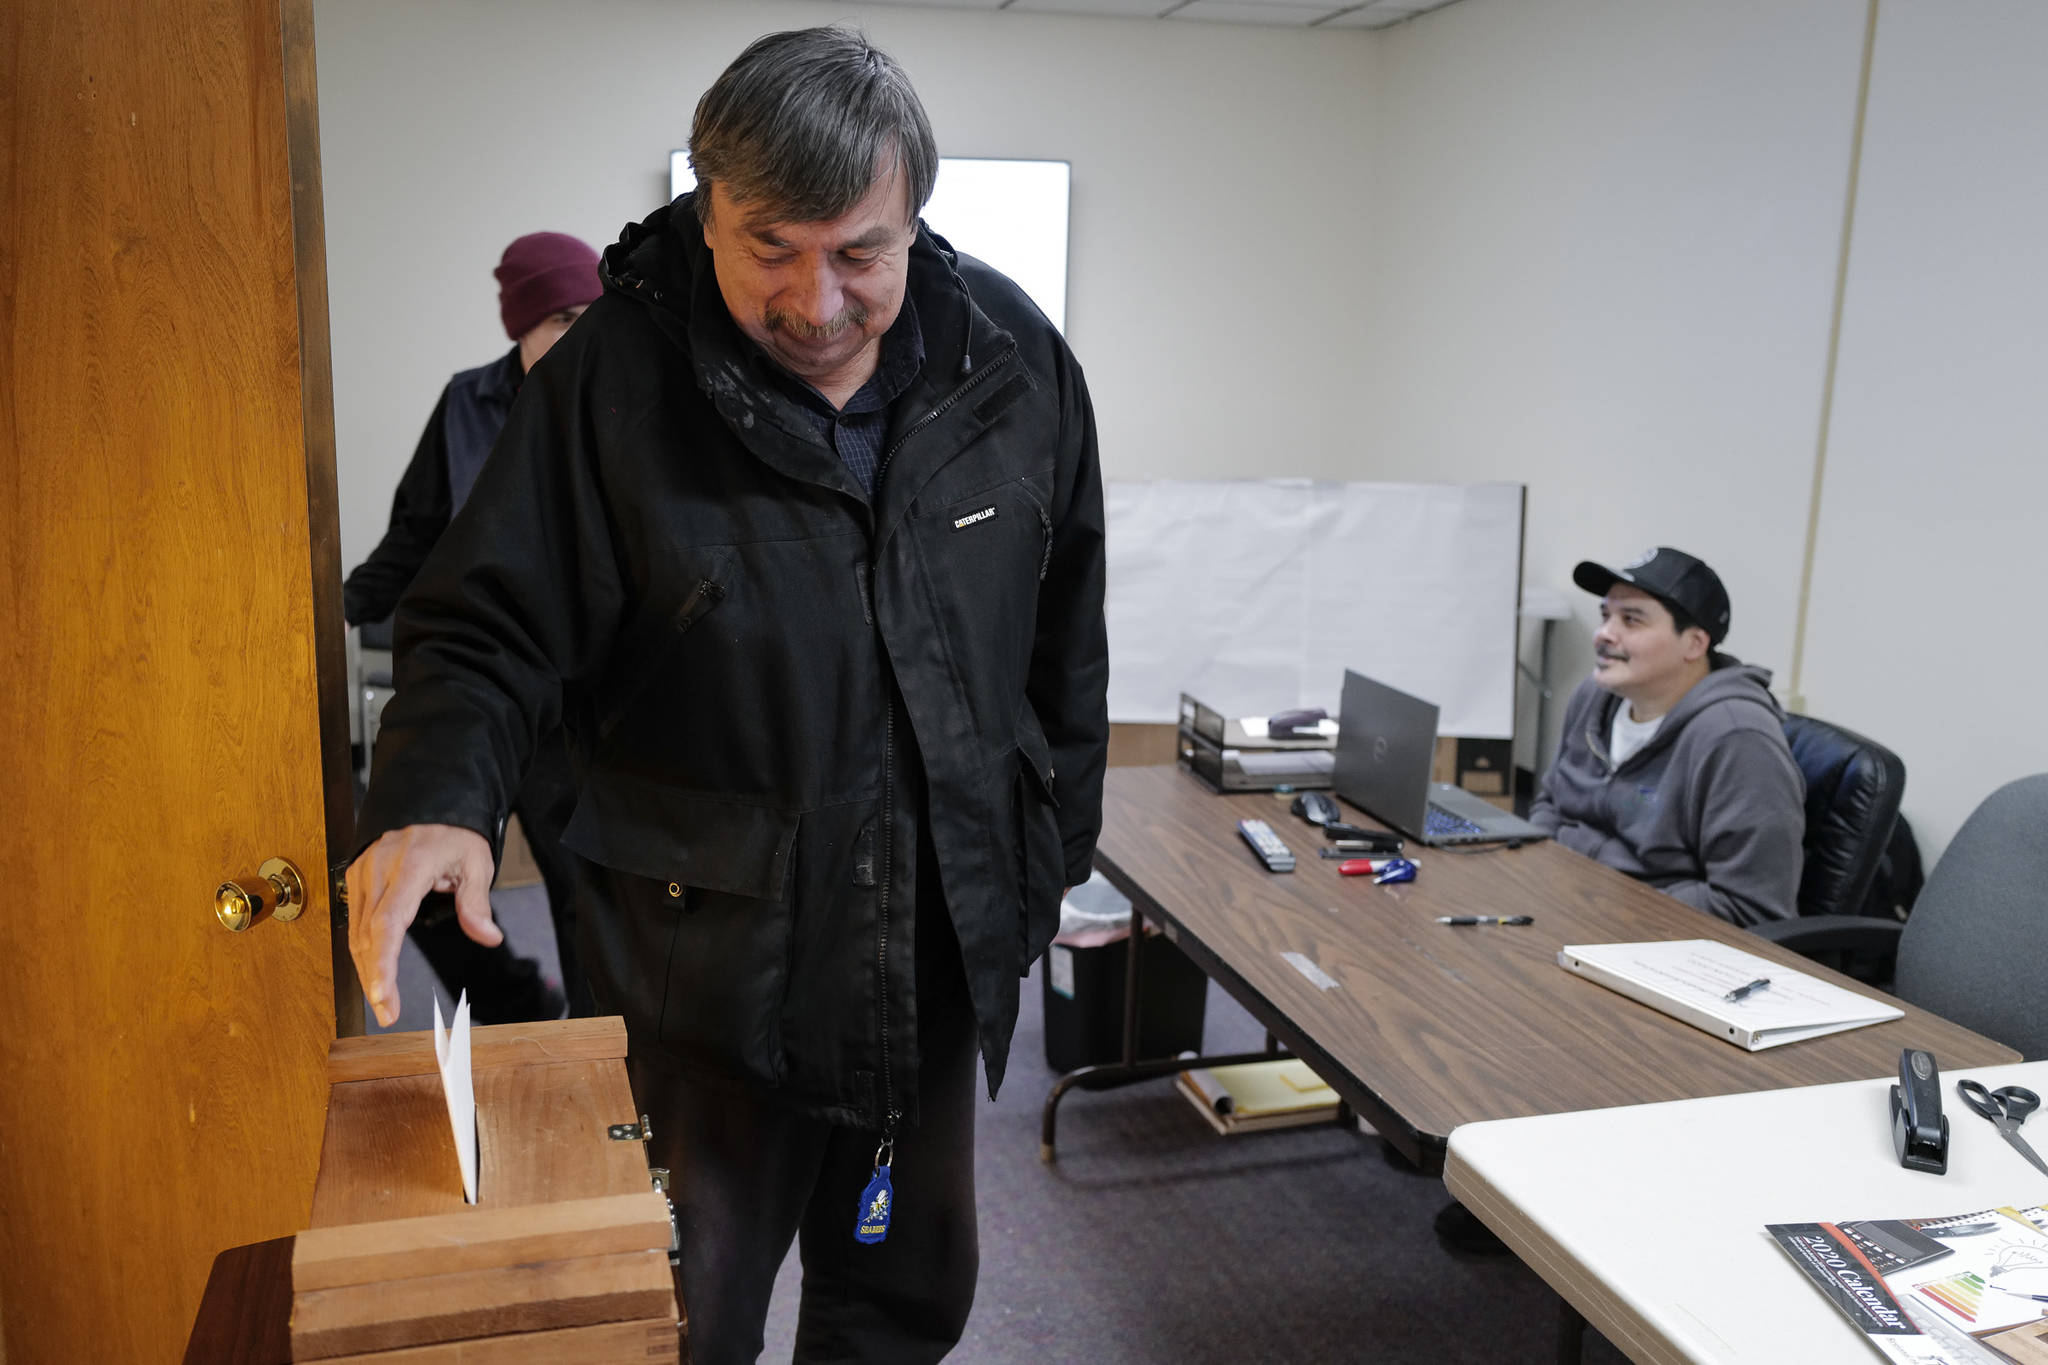 Ron Laiti drops his ballot into a ballot box after voting in the Douglas Indian Association’s election on Wednesday, Jan. 8, 2020. (Michael Penn | Juneau Empire)